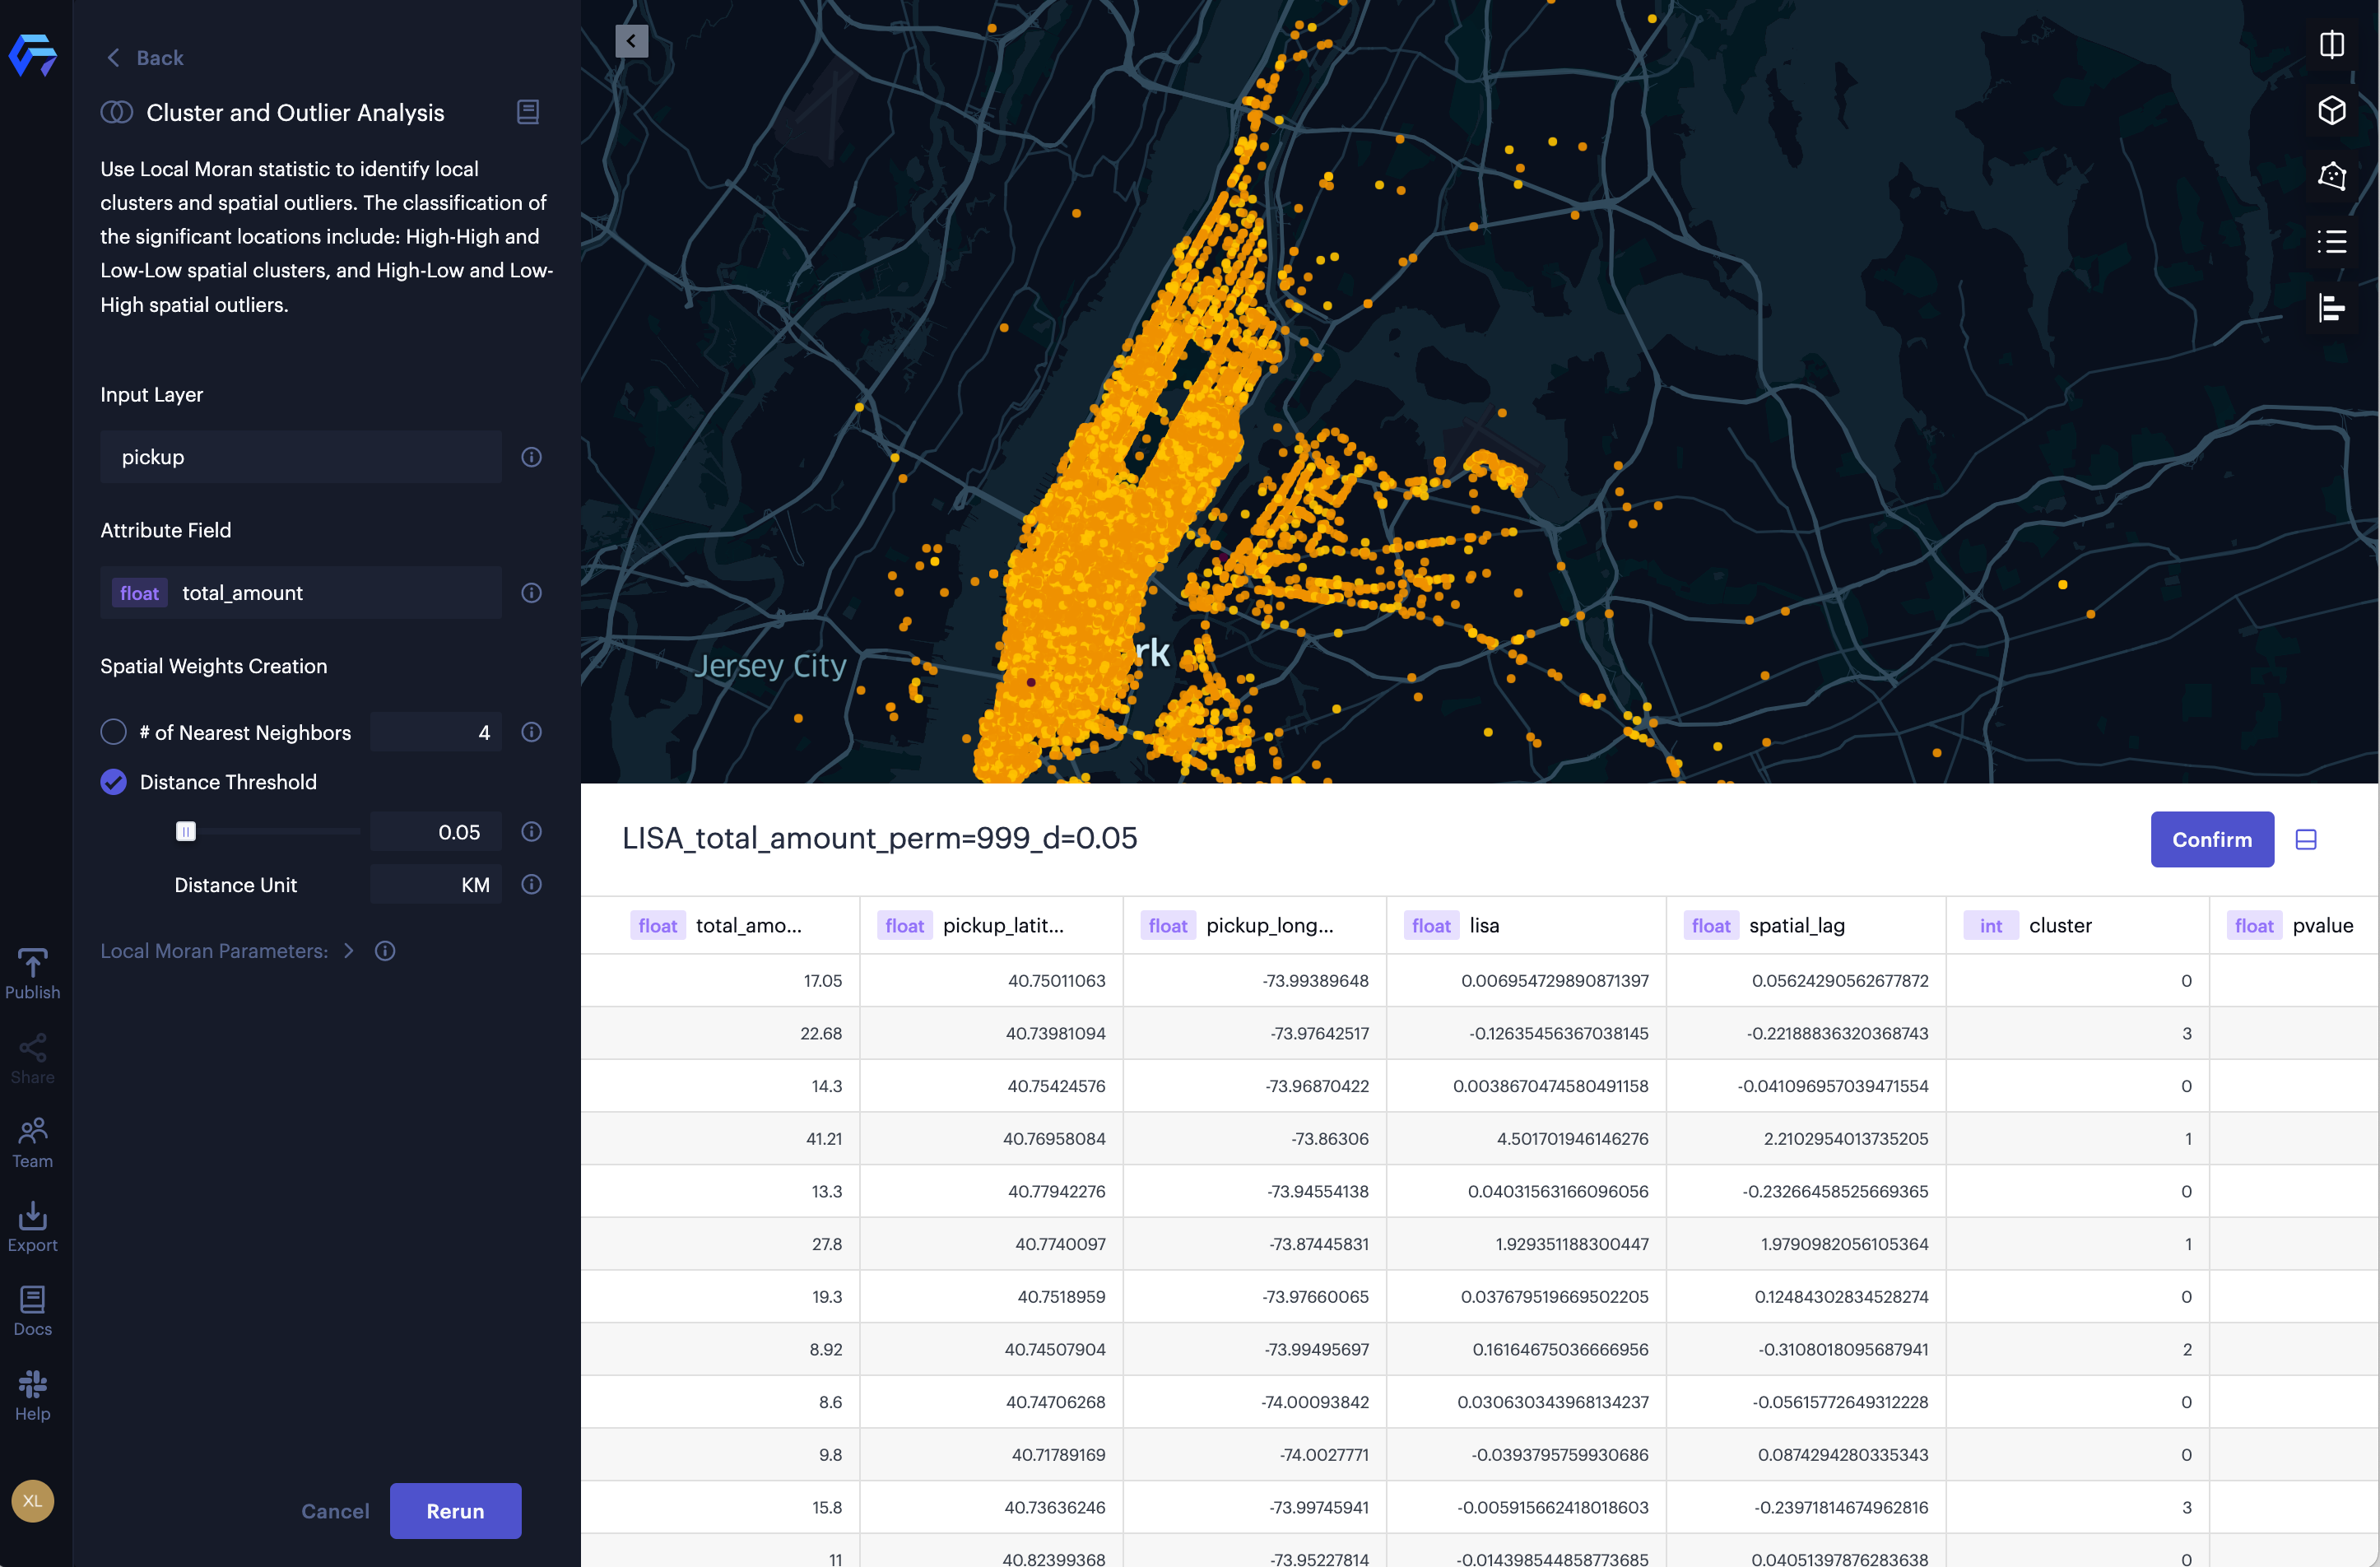 Cluster and outlier analysis of taxi fee (total amount) in New York.